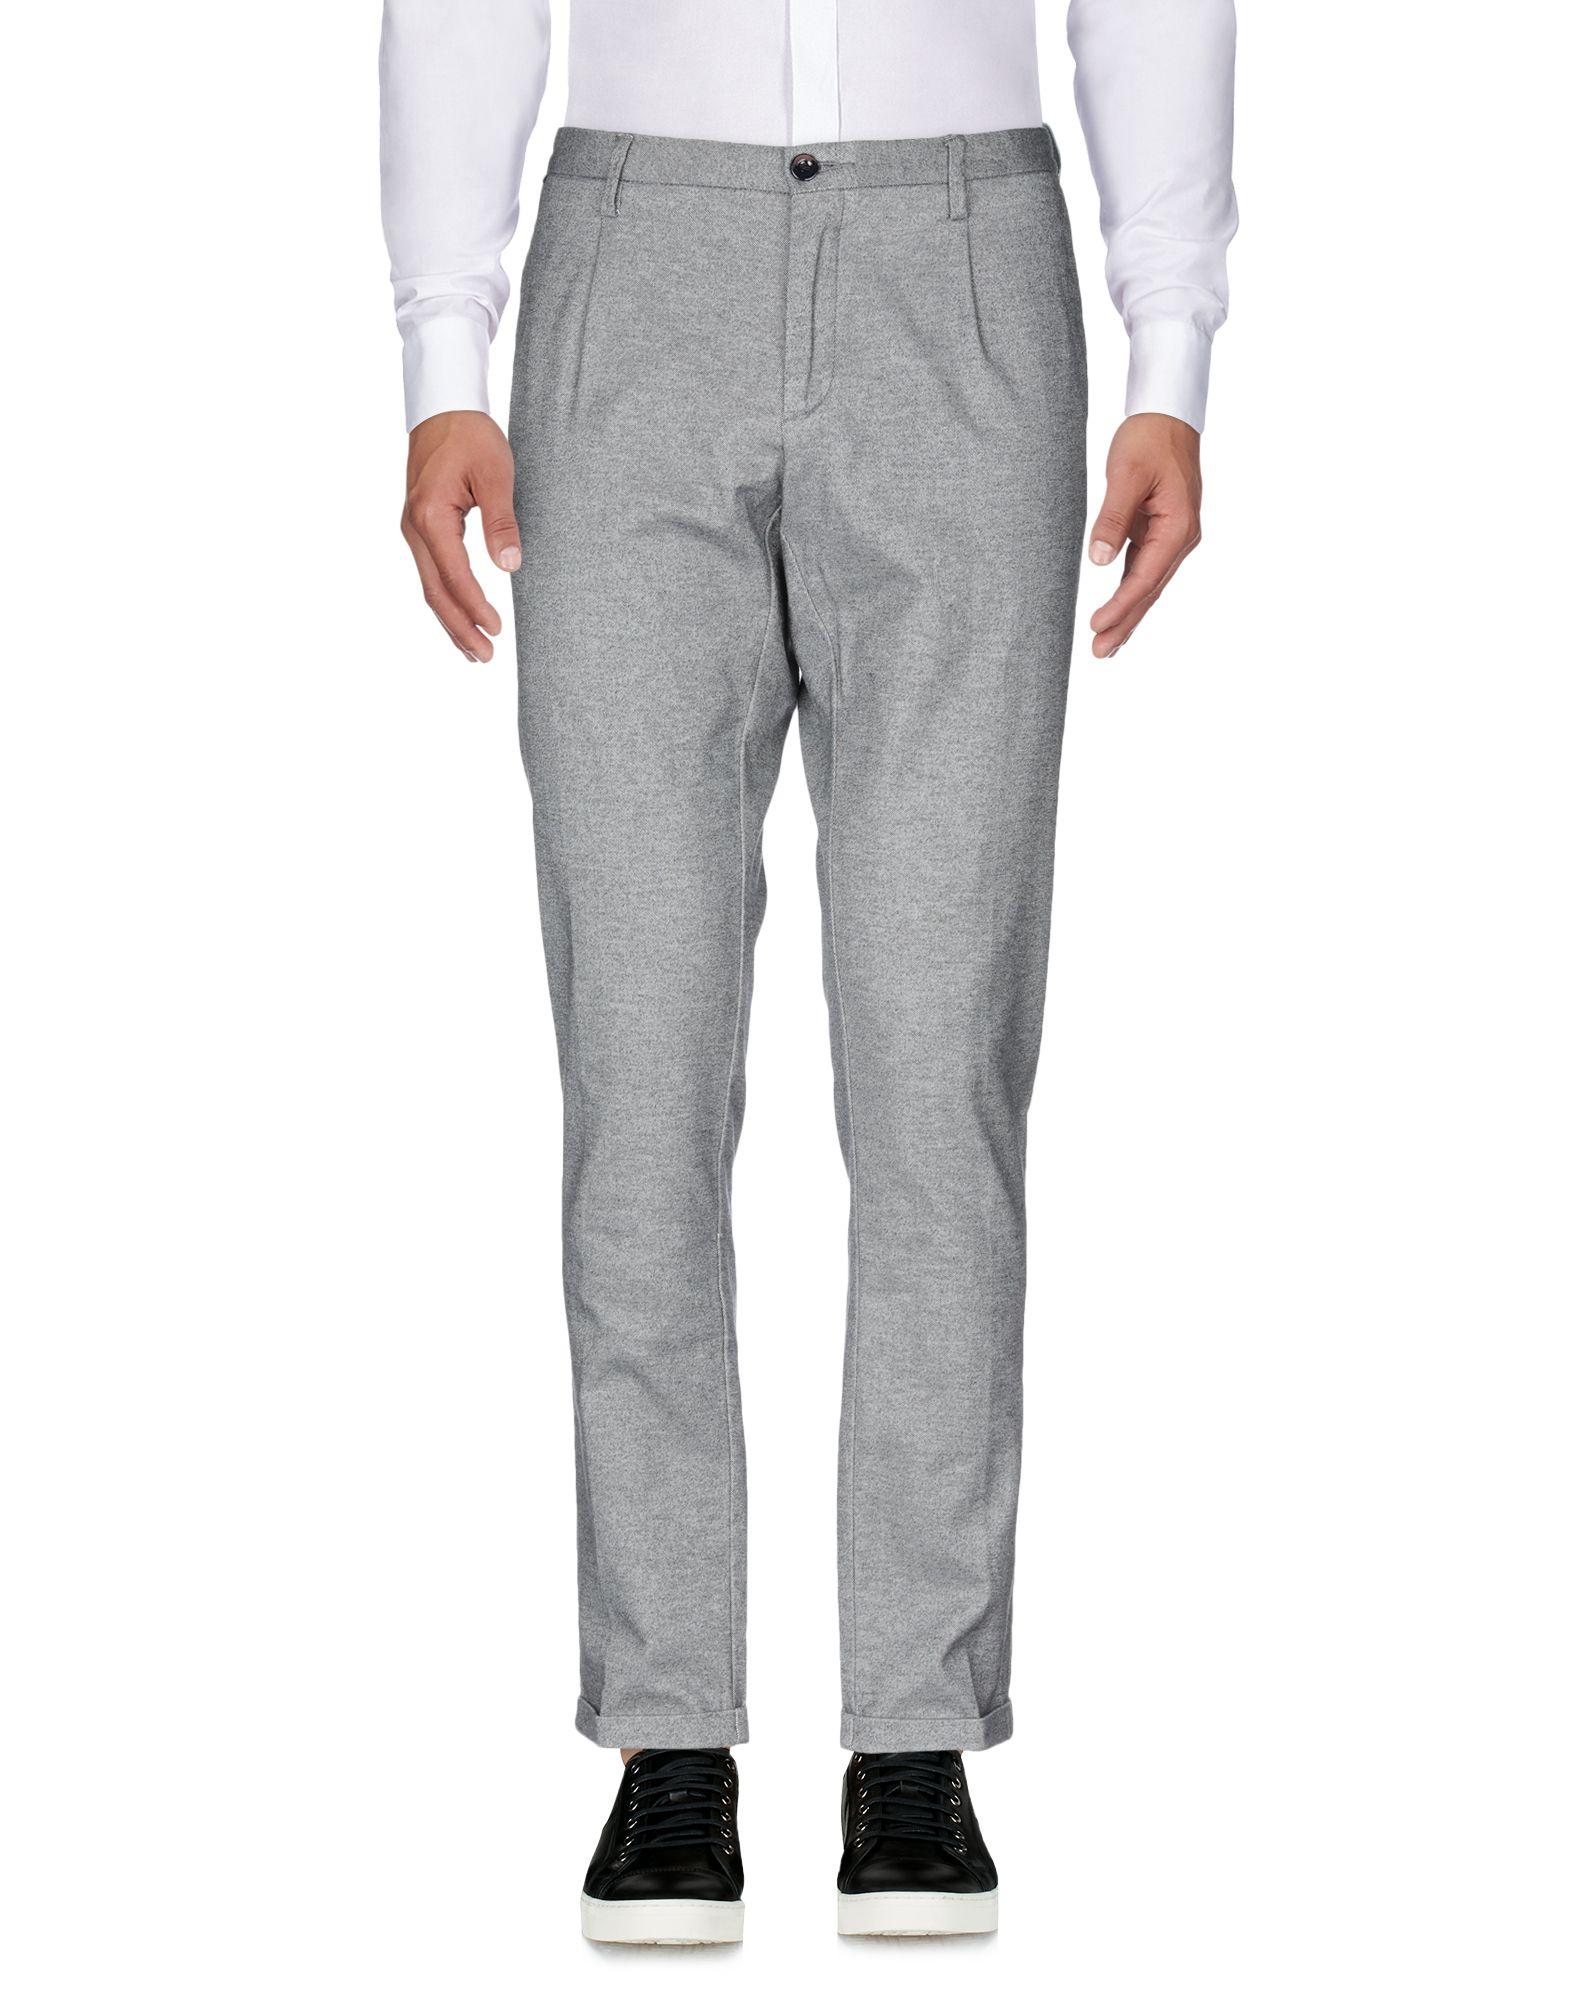 AT.P.CO Flannel Casual Pants in Light Grey (Gray) for Men - Lyst